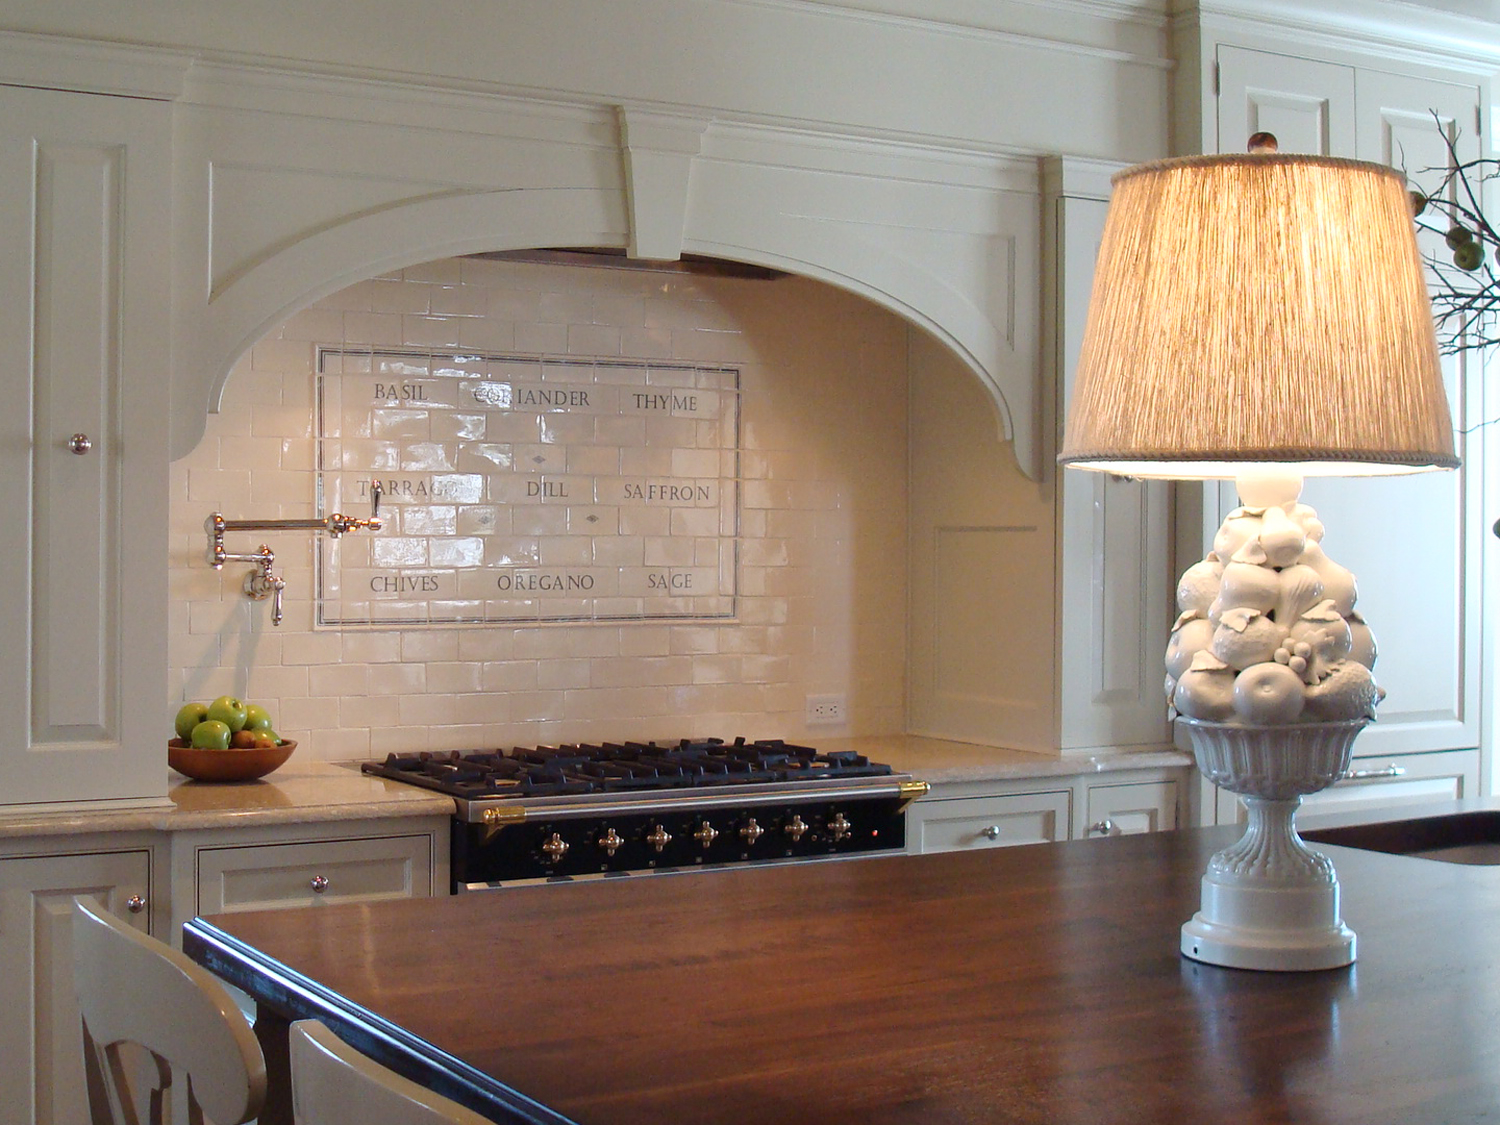 Renovation-colonial-kitchen-stove-old-greenwich-ct-interior-w.jpg